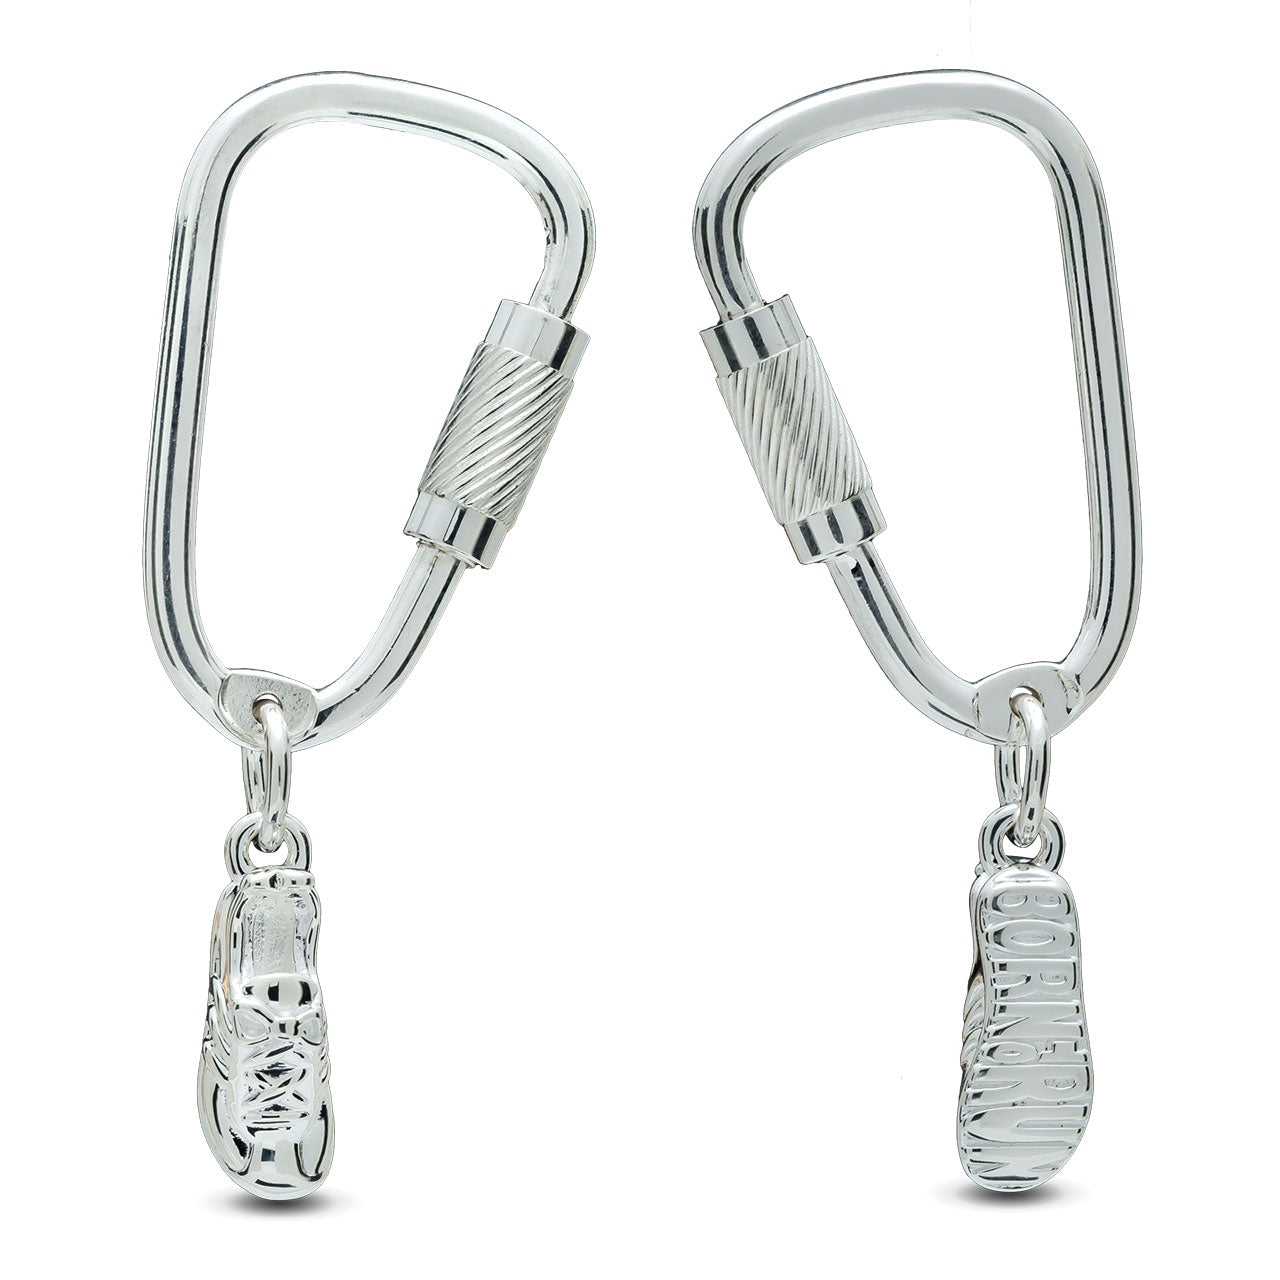 Running Shoe Climbing Carabiner Silver Key Ring gift for trail runners, climbers, hikers, from Off The Map Jewellery